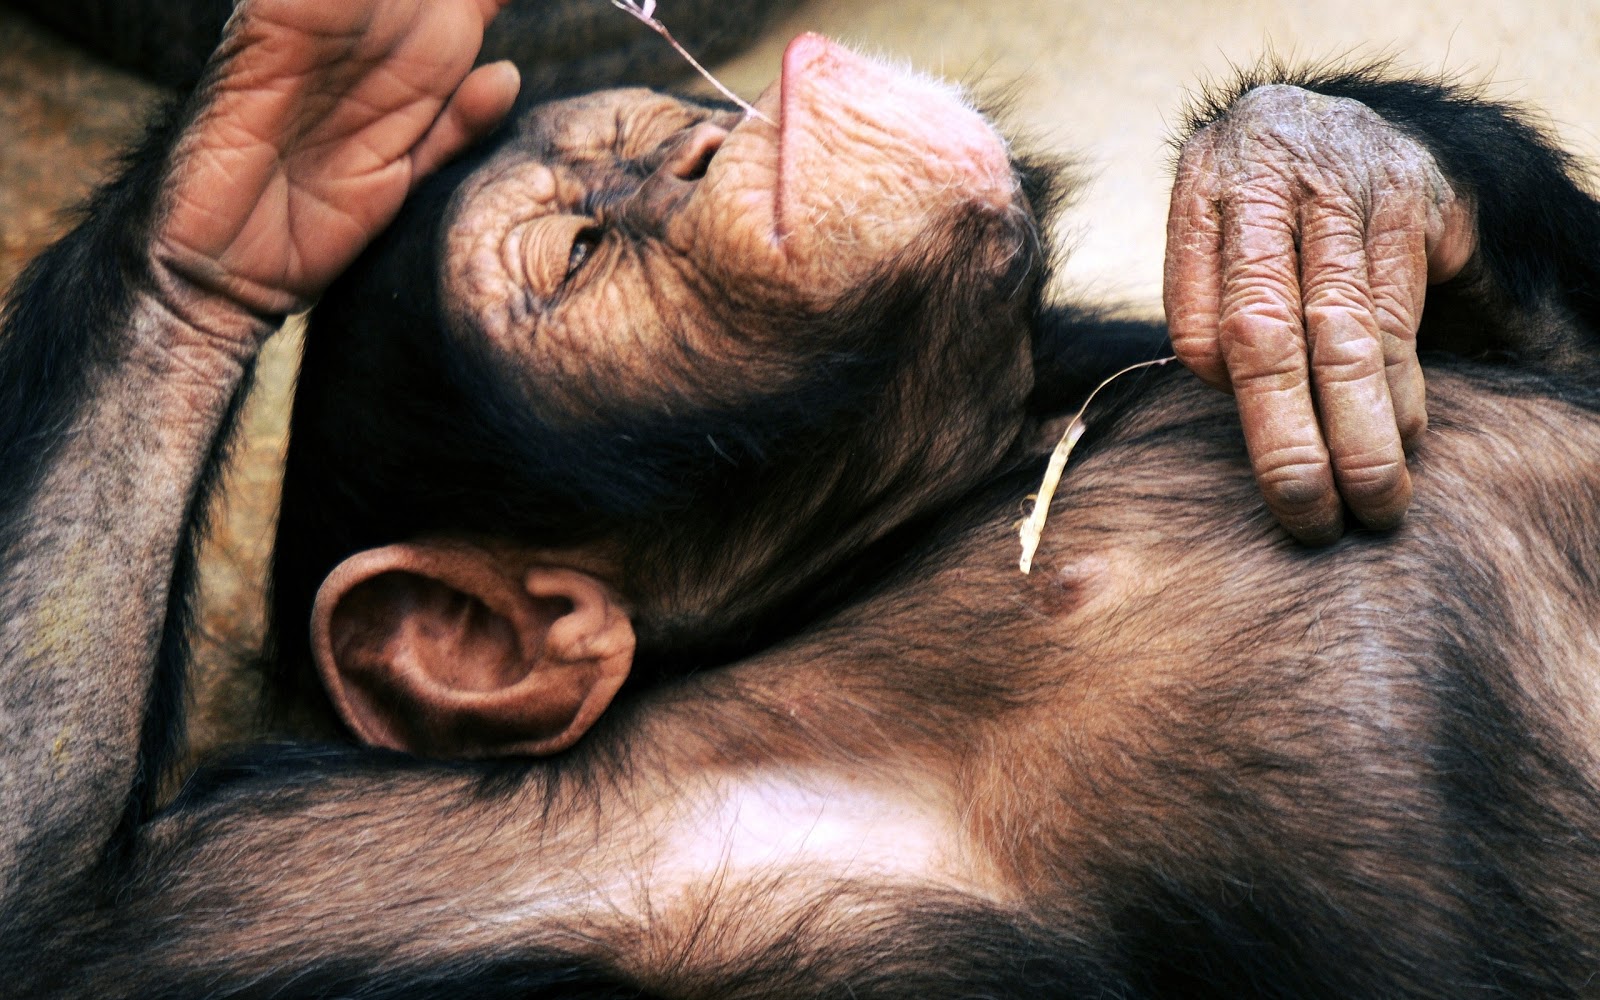 Chimp Kicking Back And Relaxing Dont Forget Chimpanzees Are Apes Not